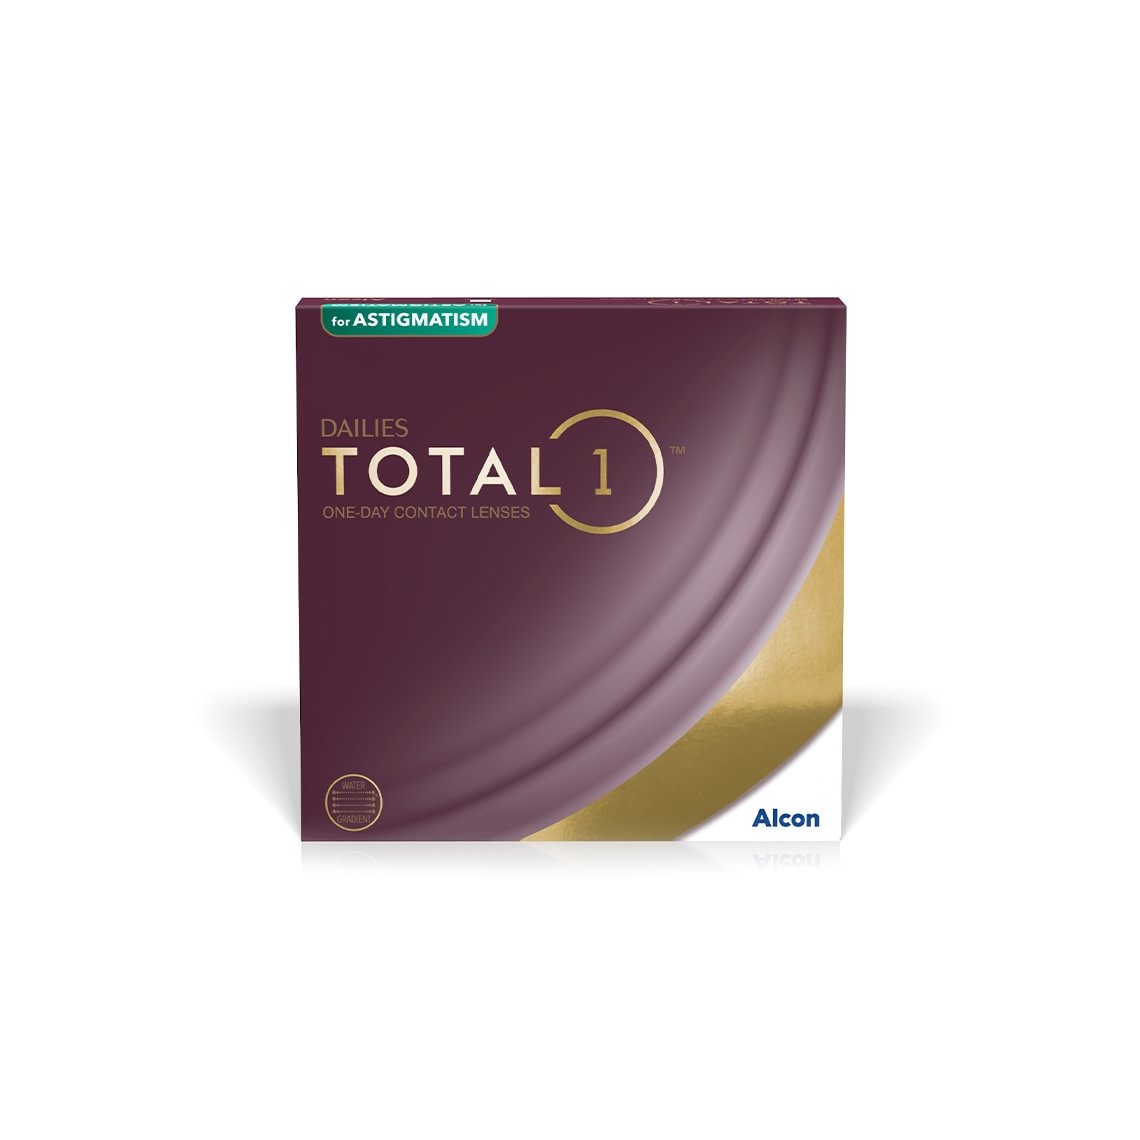 DAILIES Total 1 For Astigmatism 90 st/box